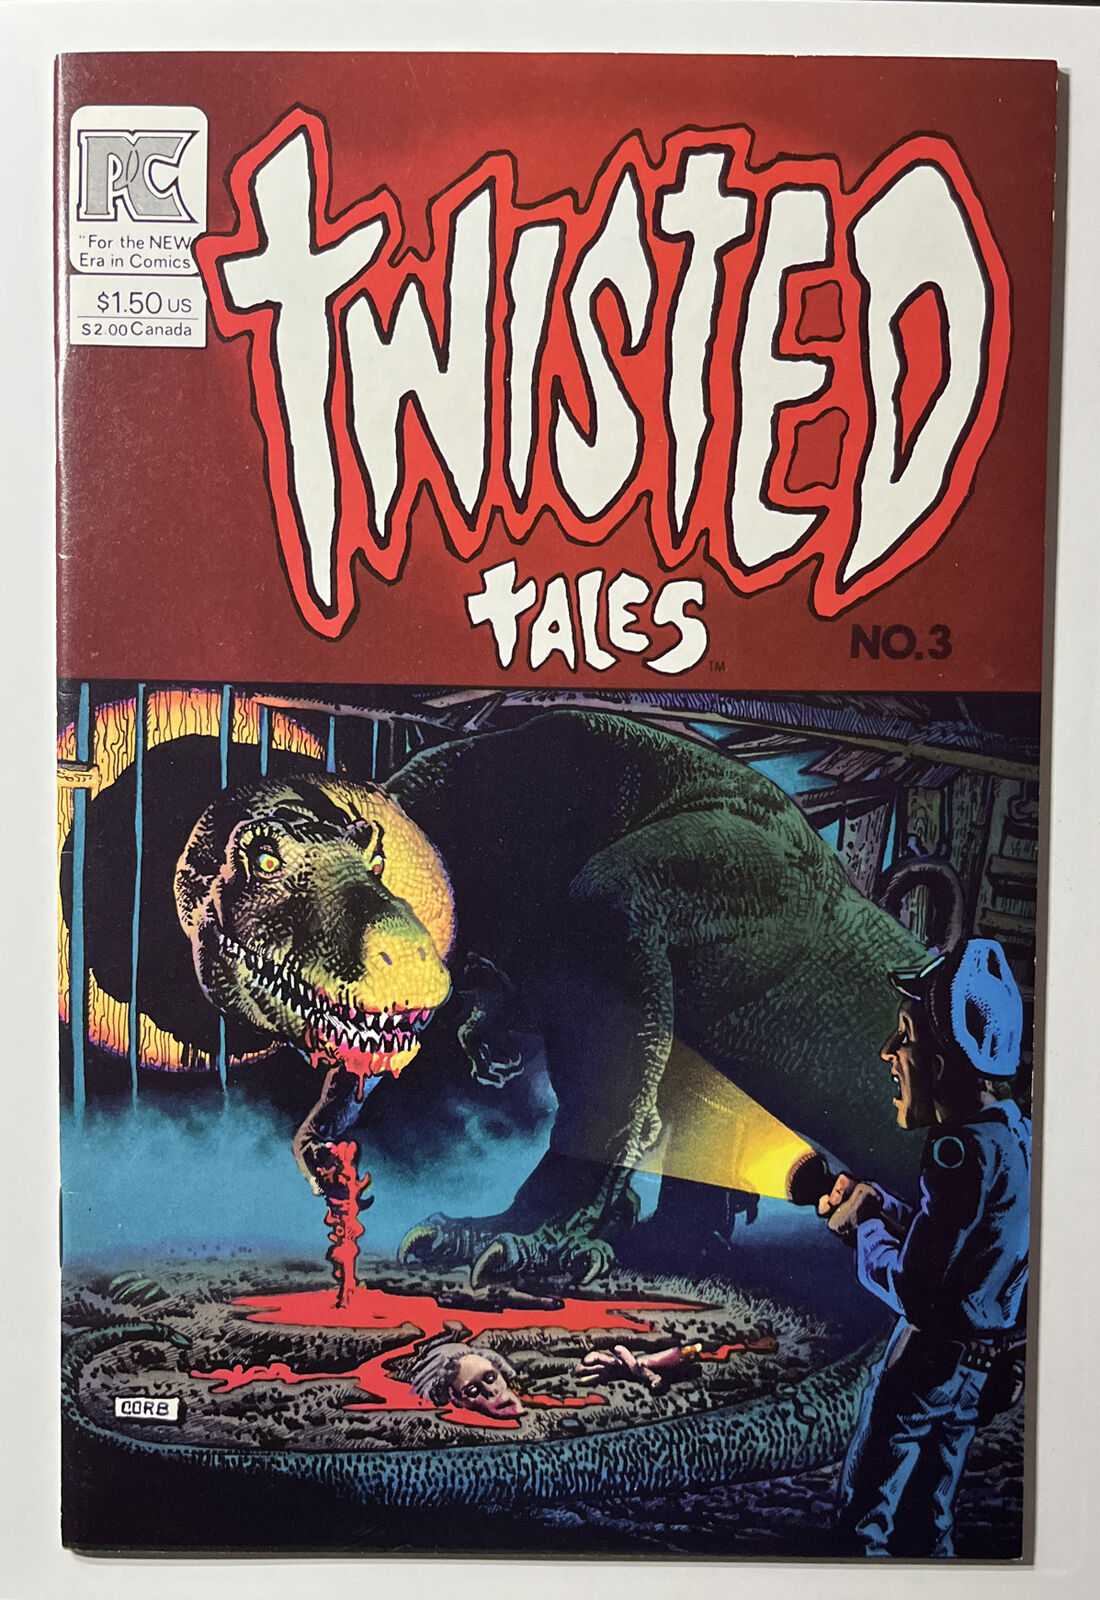 TWISTED TALES #3 (1983) HIGH GRADE COPY signed by Bruce Jones no COA